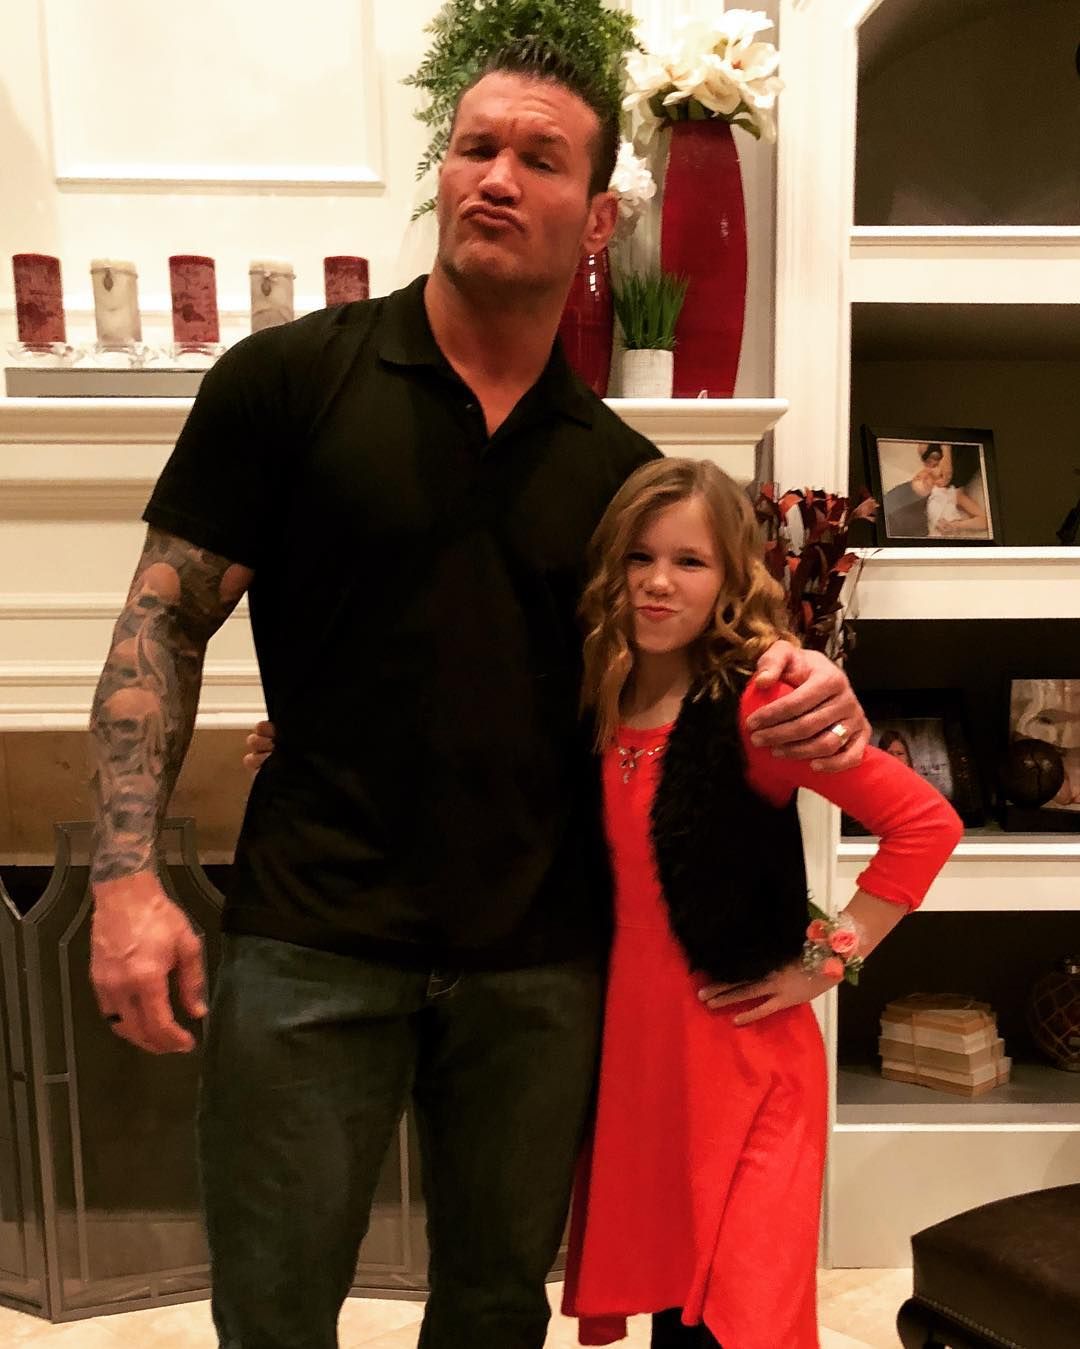 Randy Orton with his daughter Alanna Marie Orton in 2018